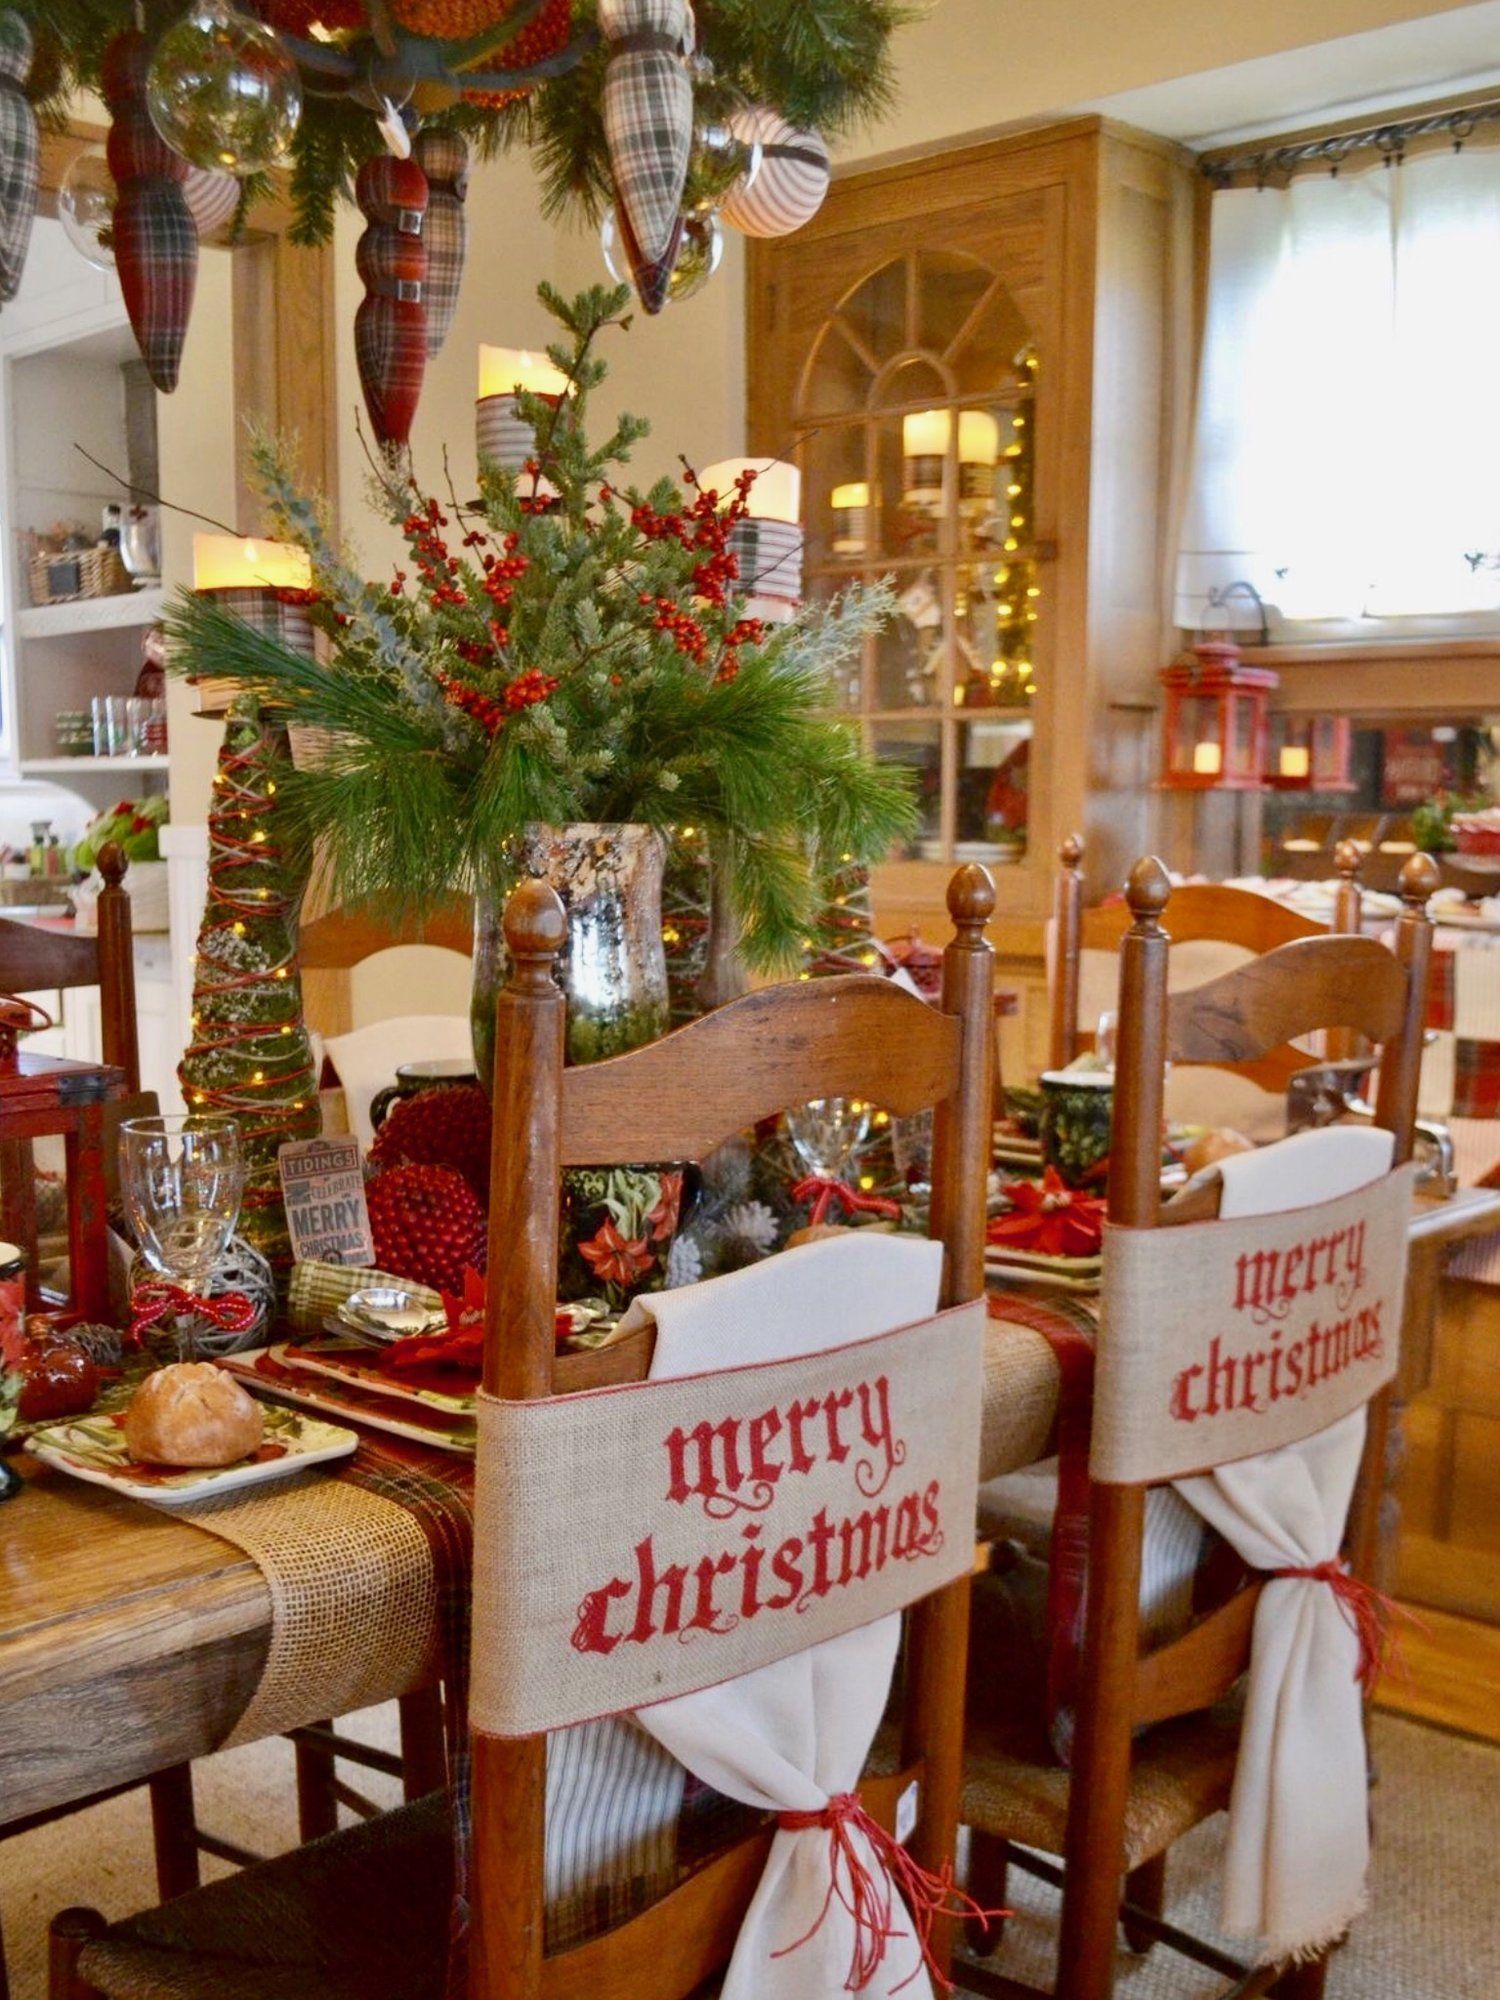 Top Christmas Table Decorations From Pinterest and Instagram @styleestate